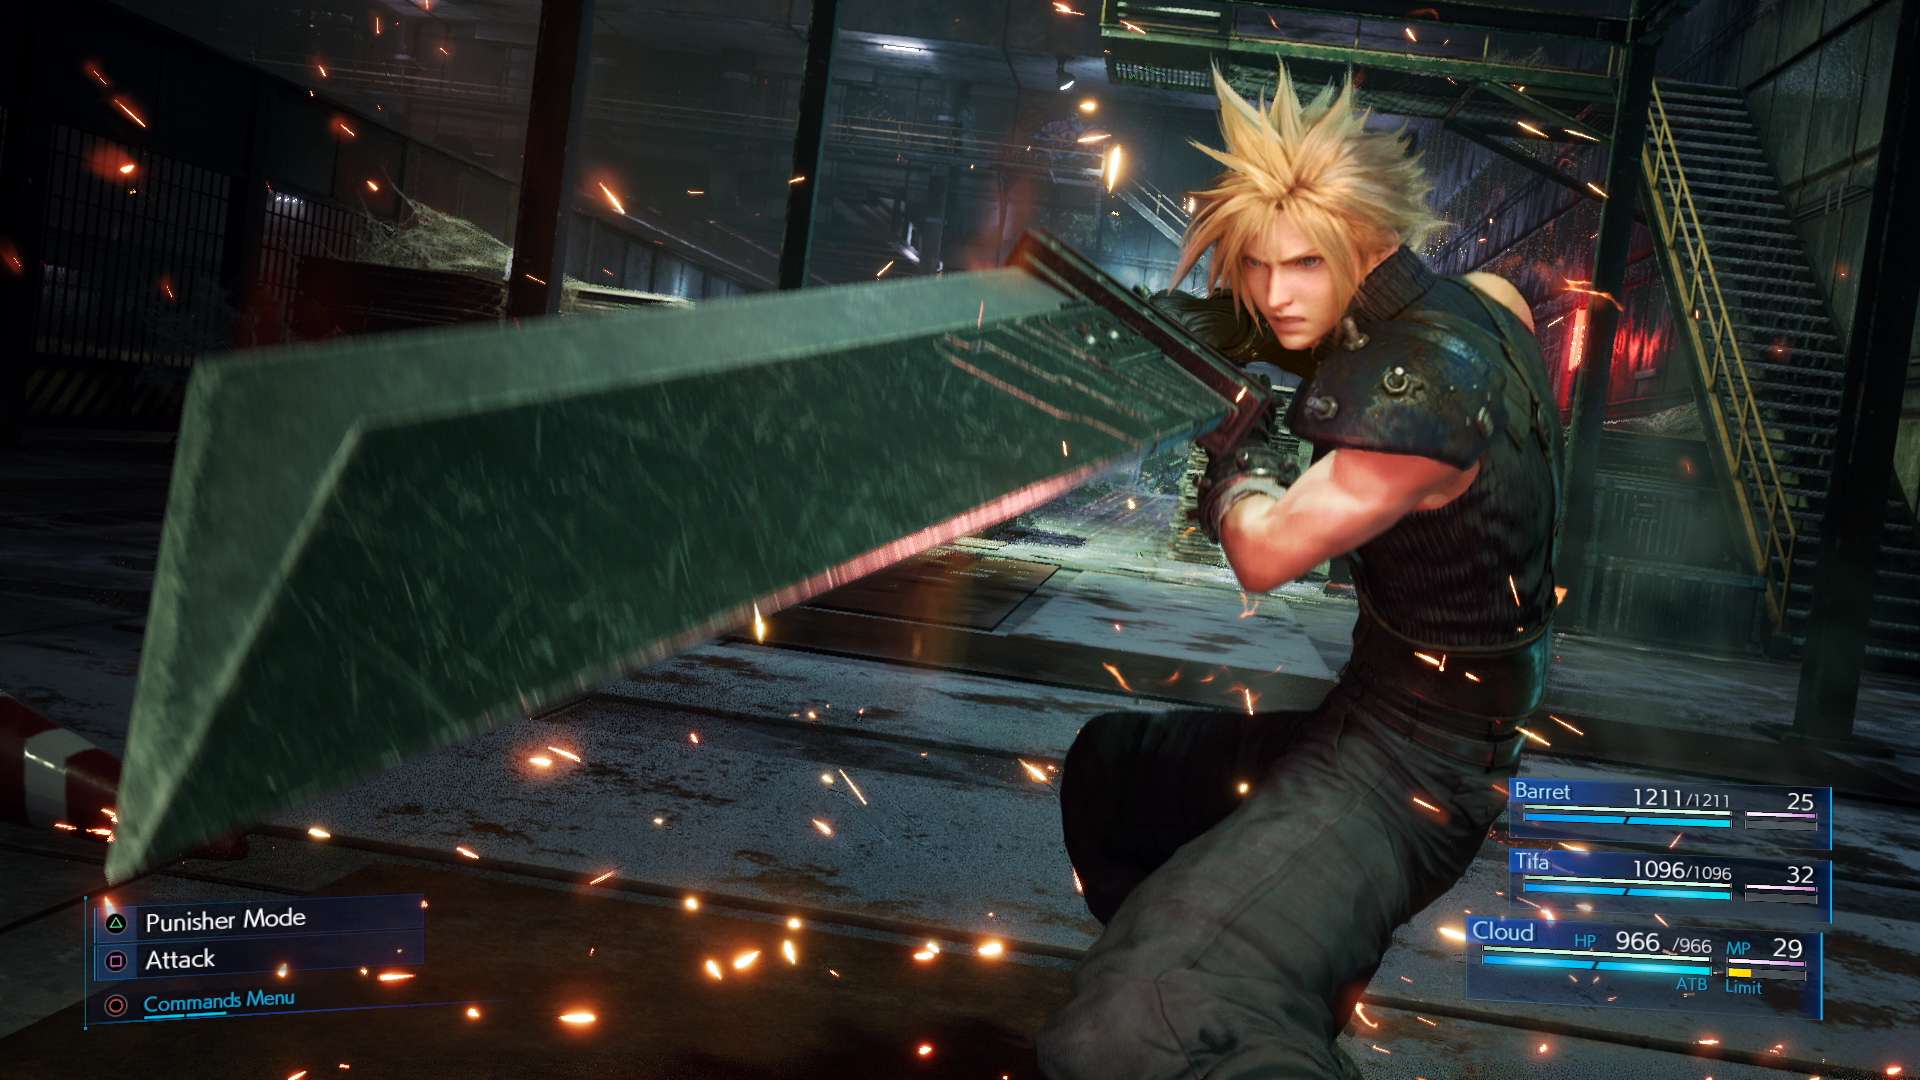 Final Fantasy 7 Remake on PC is a disappointing, barebones port